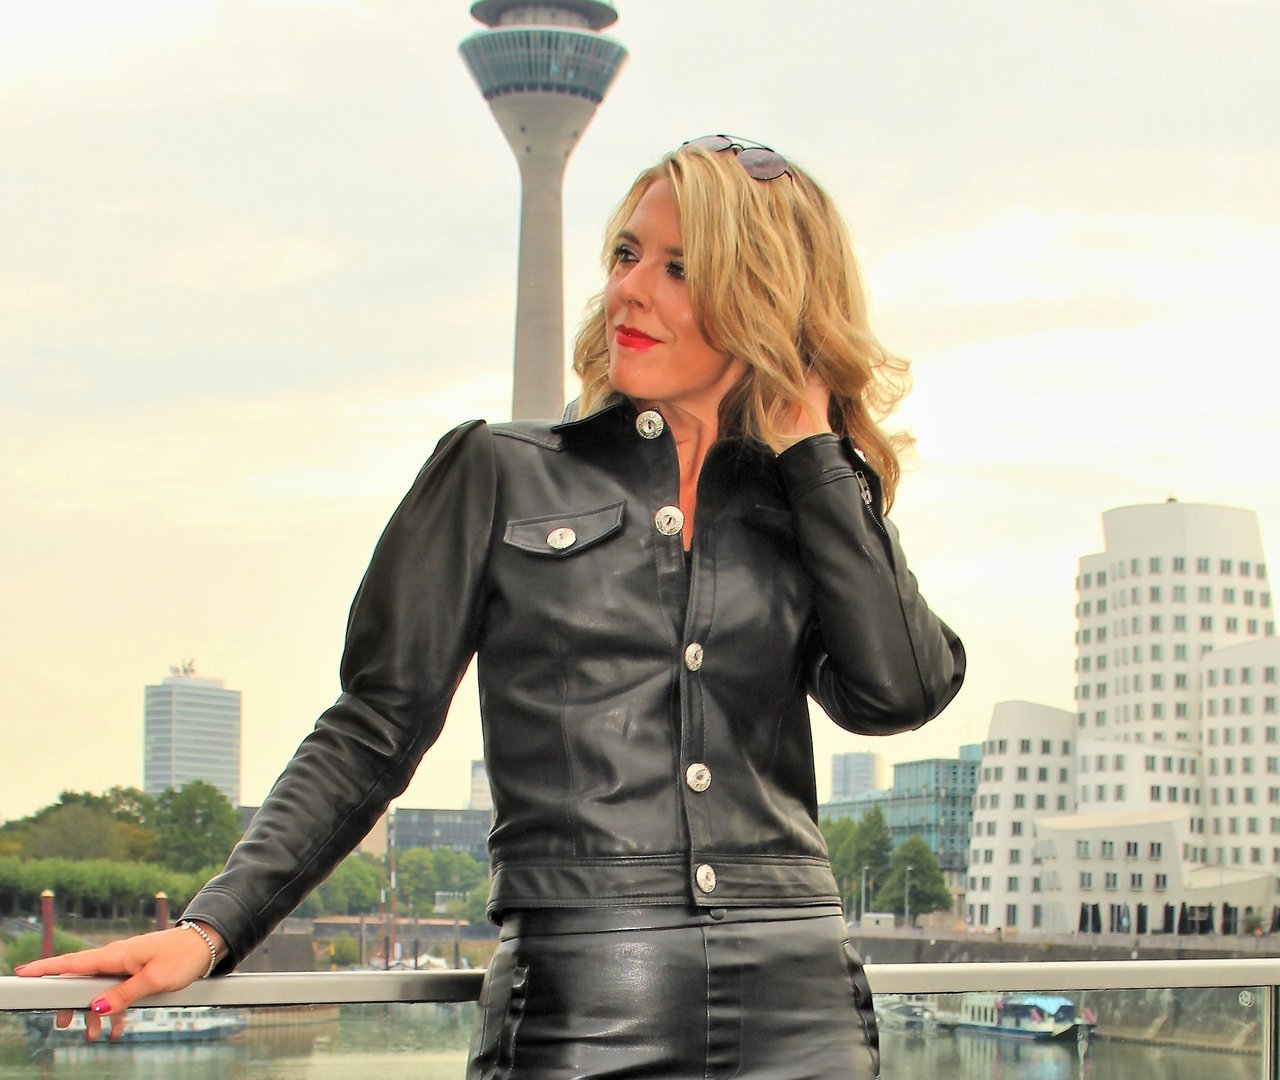 Leather blouse in REAL leather in puffed sleeves elegant in black